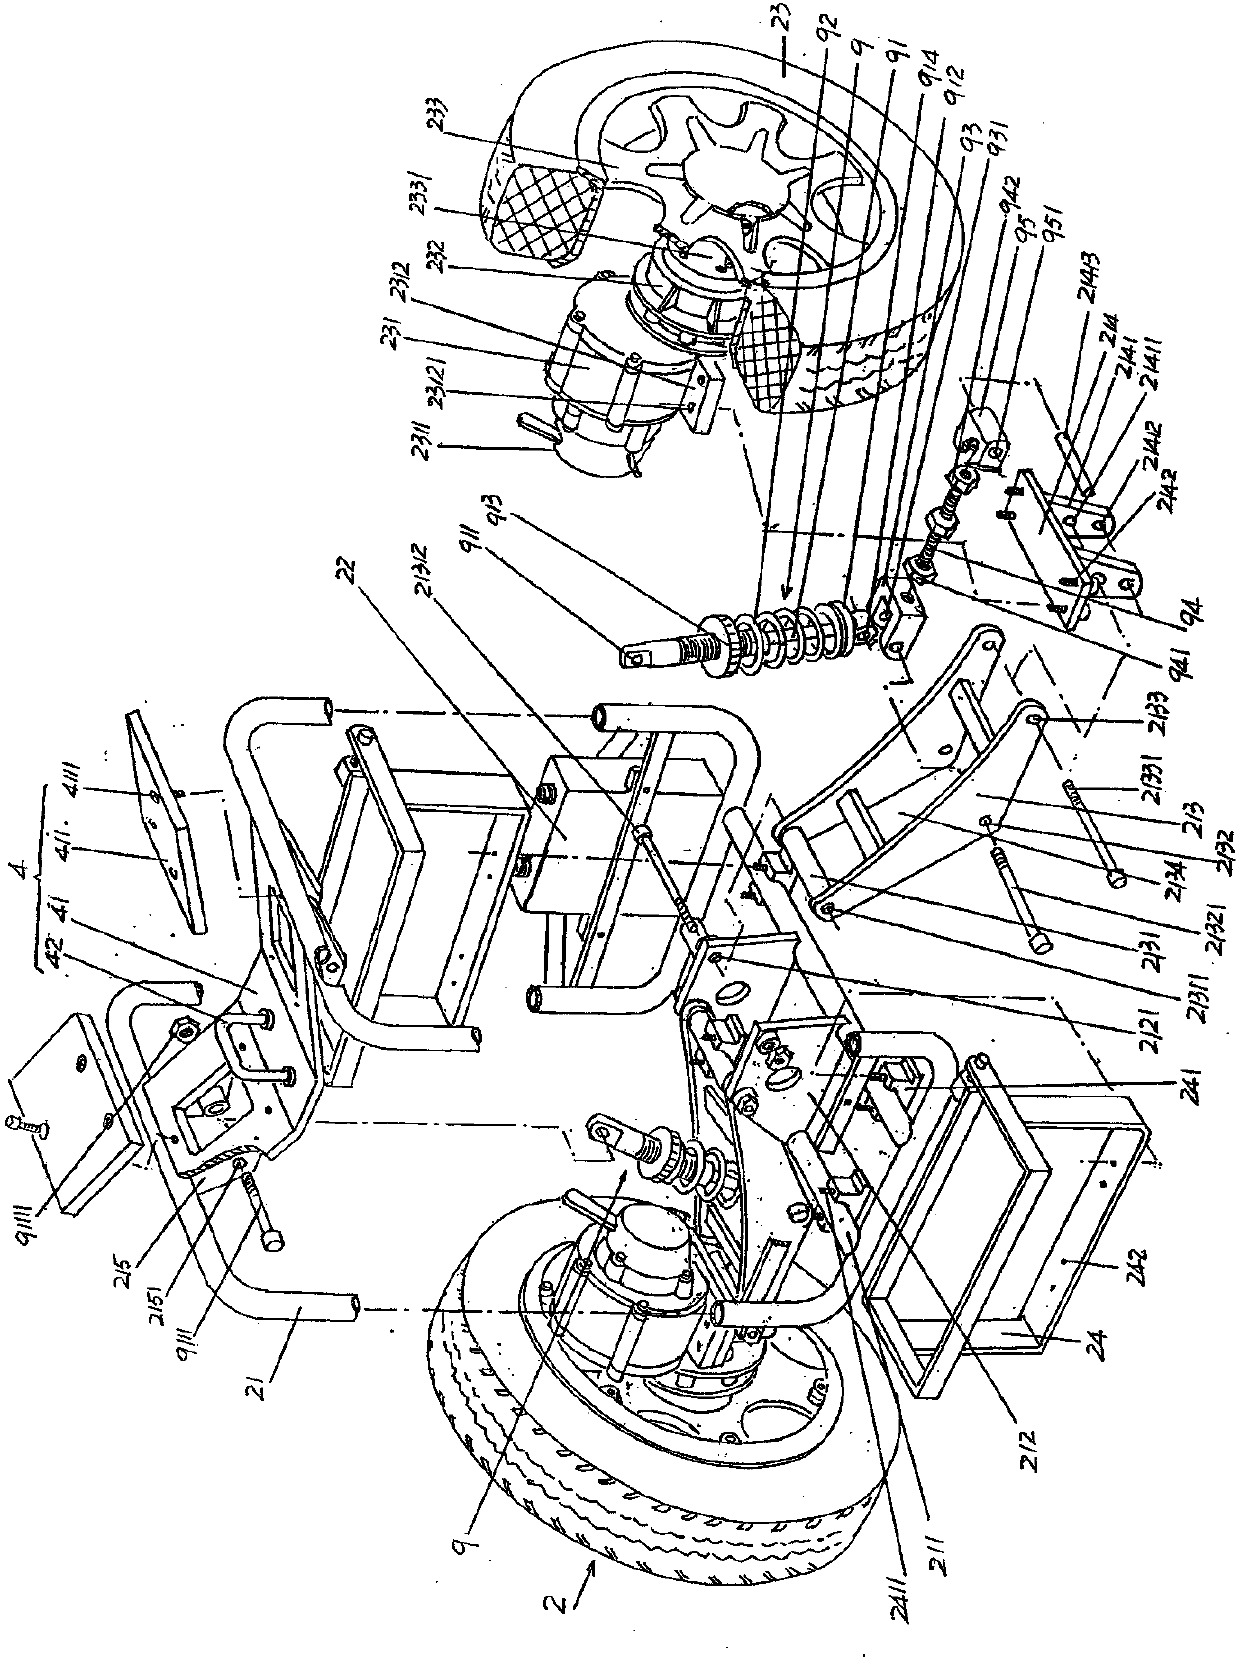 Electric wheelchair with connectable or separable body and electric mechanism